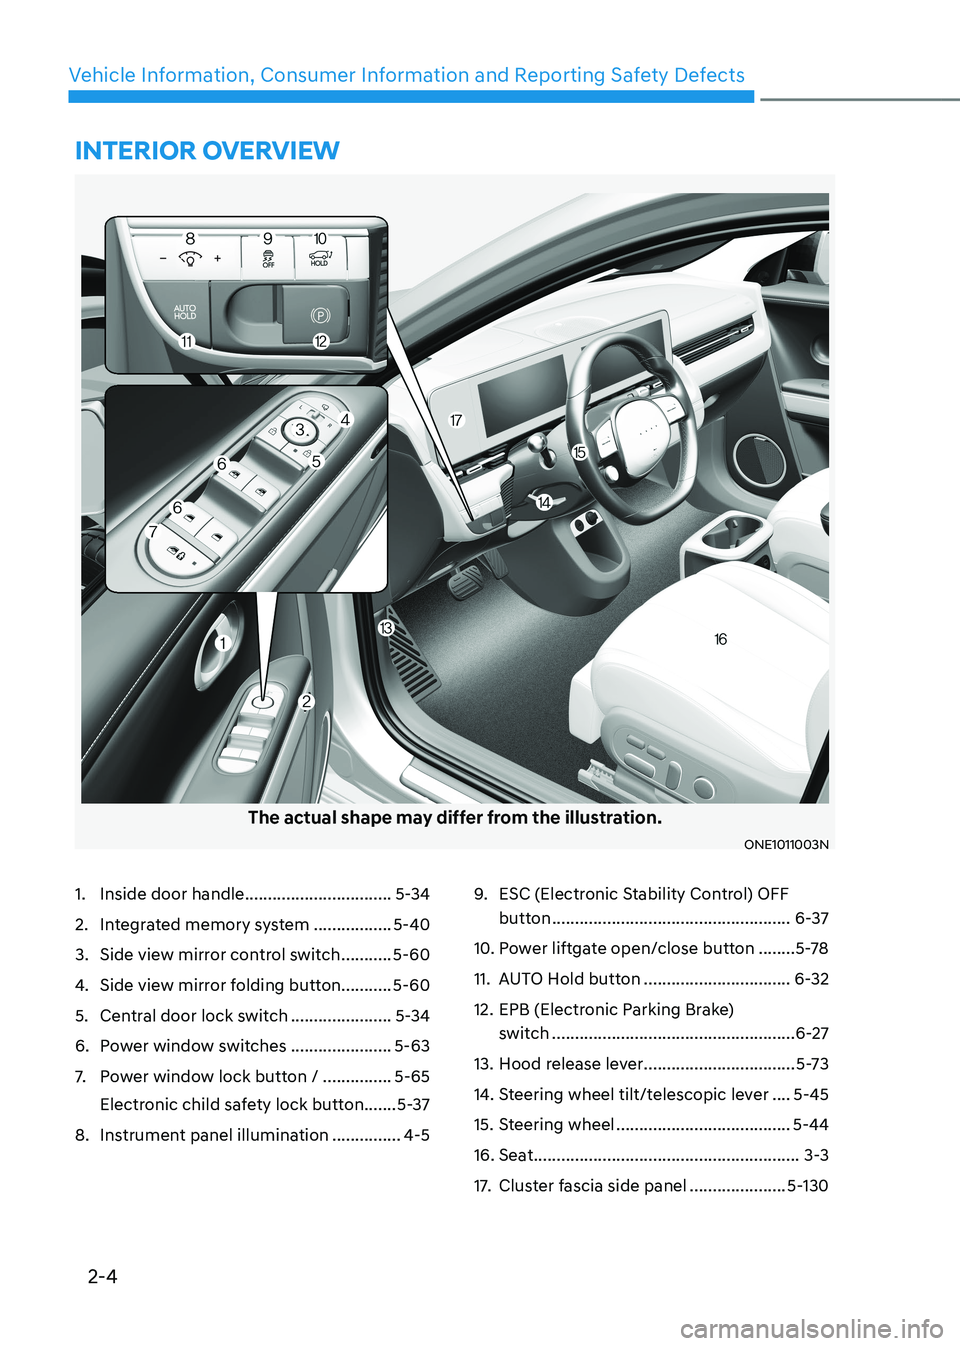 HYUNDAI IONIQ 5 2023  Owners Manual 2-4
Vehicle Information, Consumer Information and Reporting Safety Defects
The actual shape may differ from the illustration.
ONE1011003N
1.  Inside door handle  ................................5-34
2